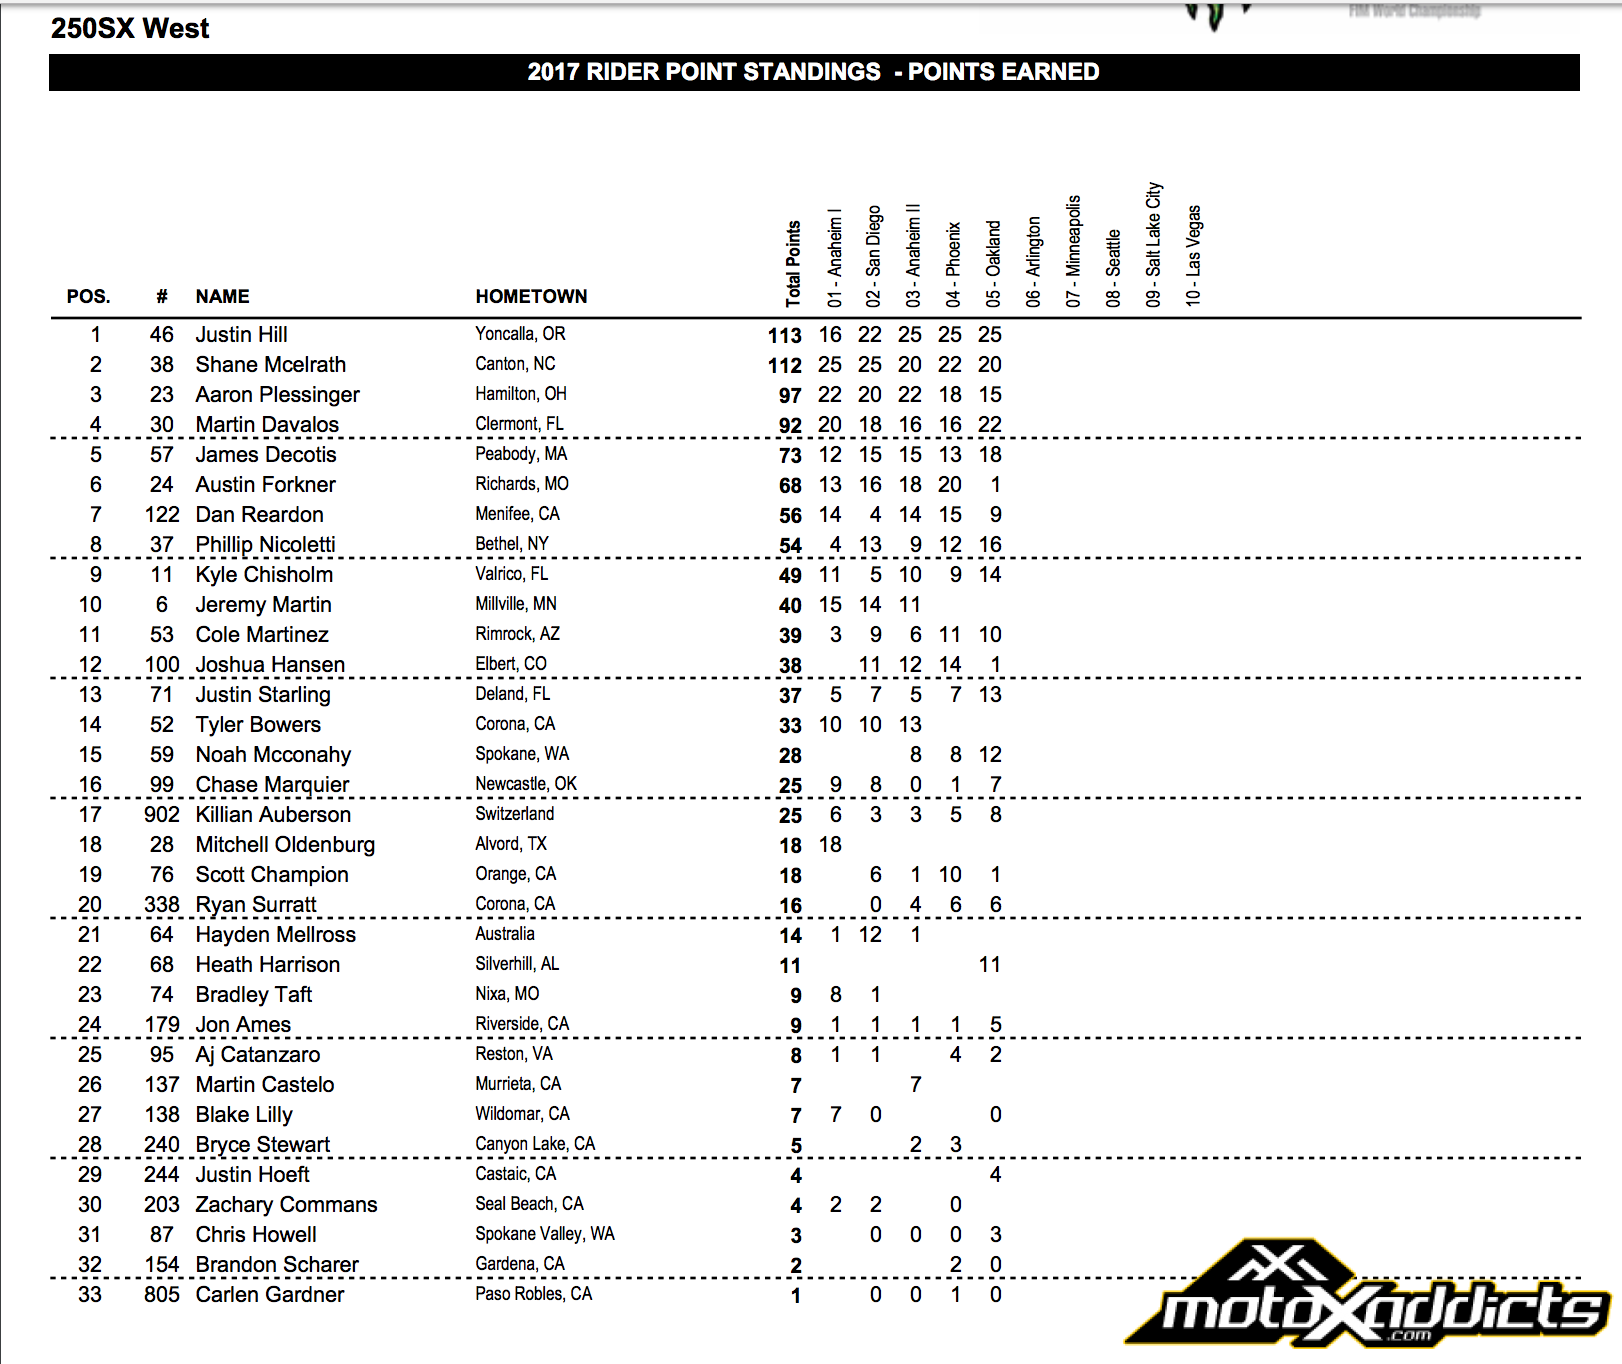 2017 250SX Western Championship Points Standings - After Round 5 - Click to Enlarge